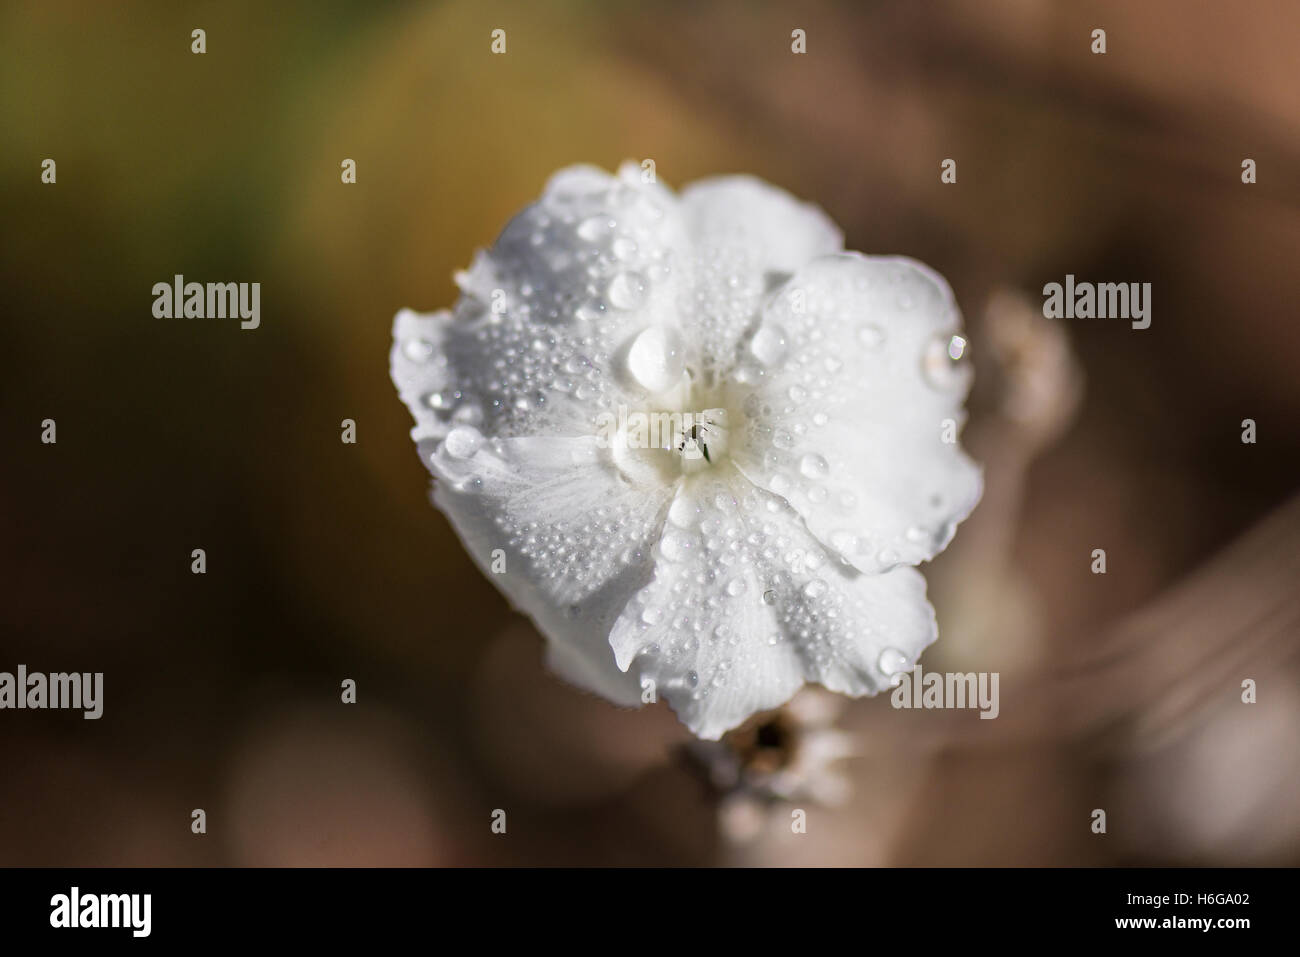 A close up of the droplet covered flower of a white-flowered rose campion (Lychnis coronaria 'Alba') Stock Photo